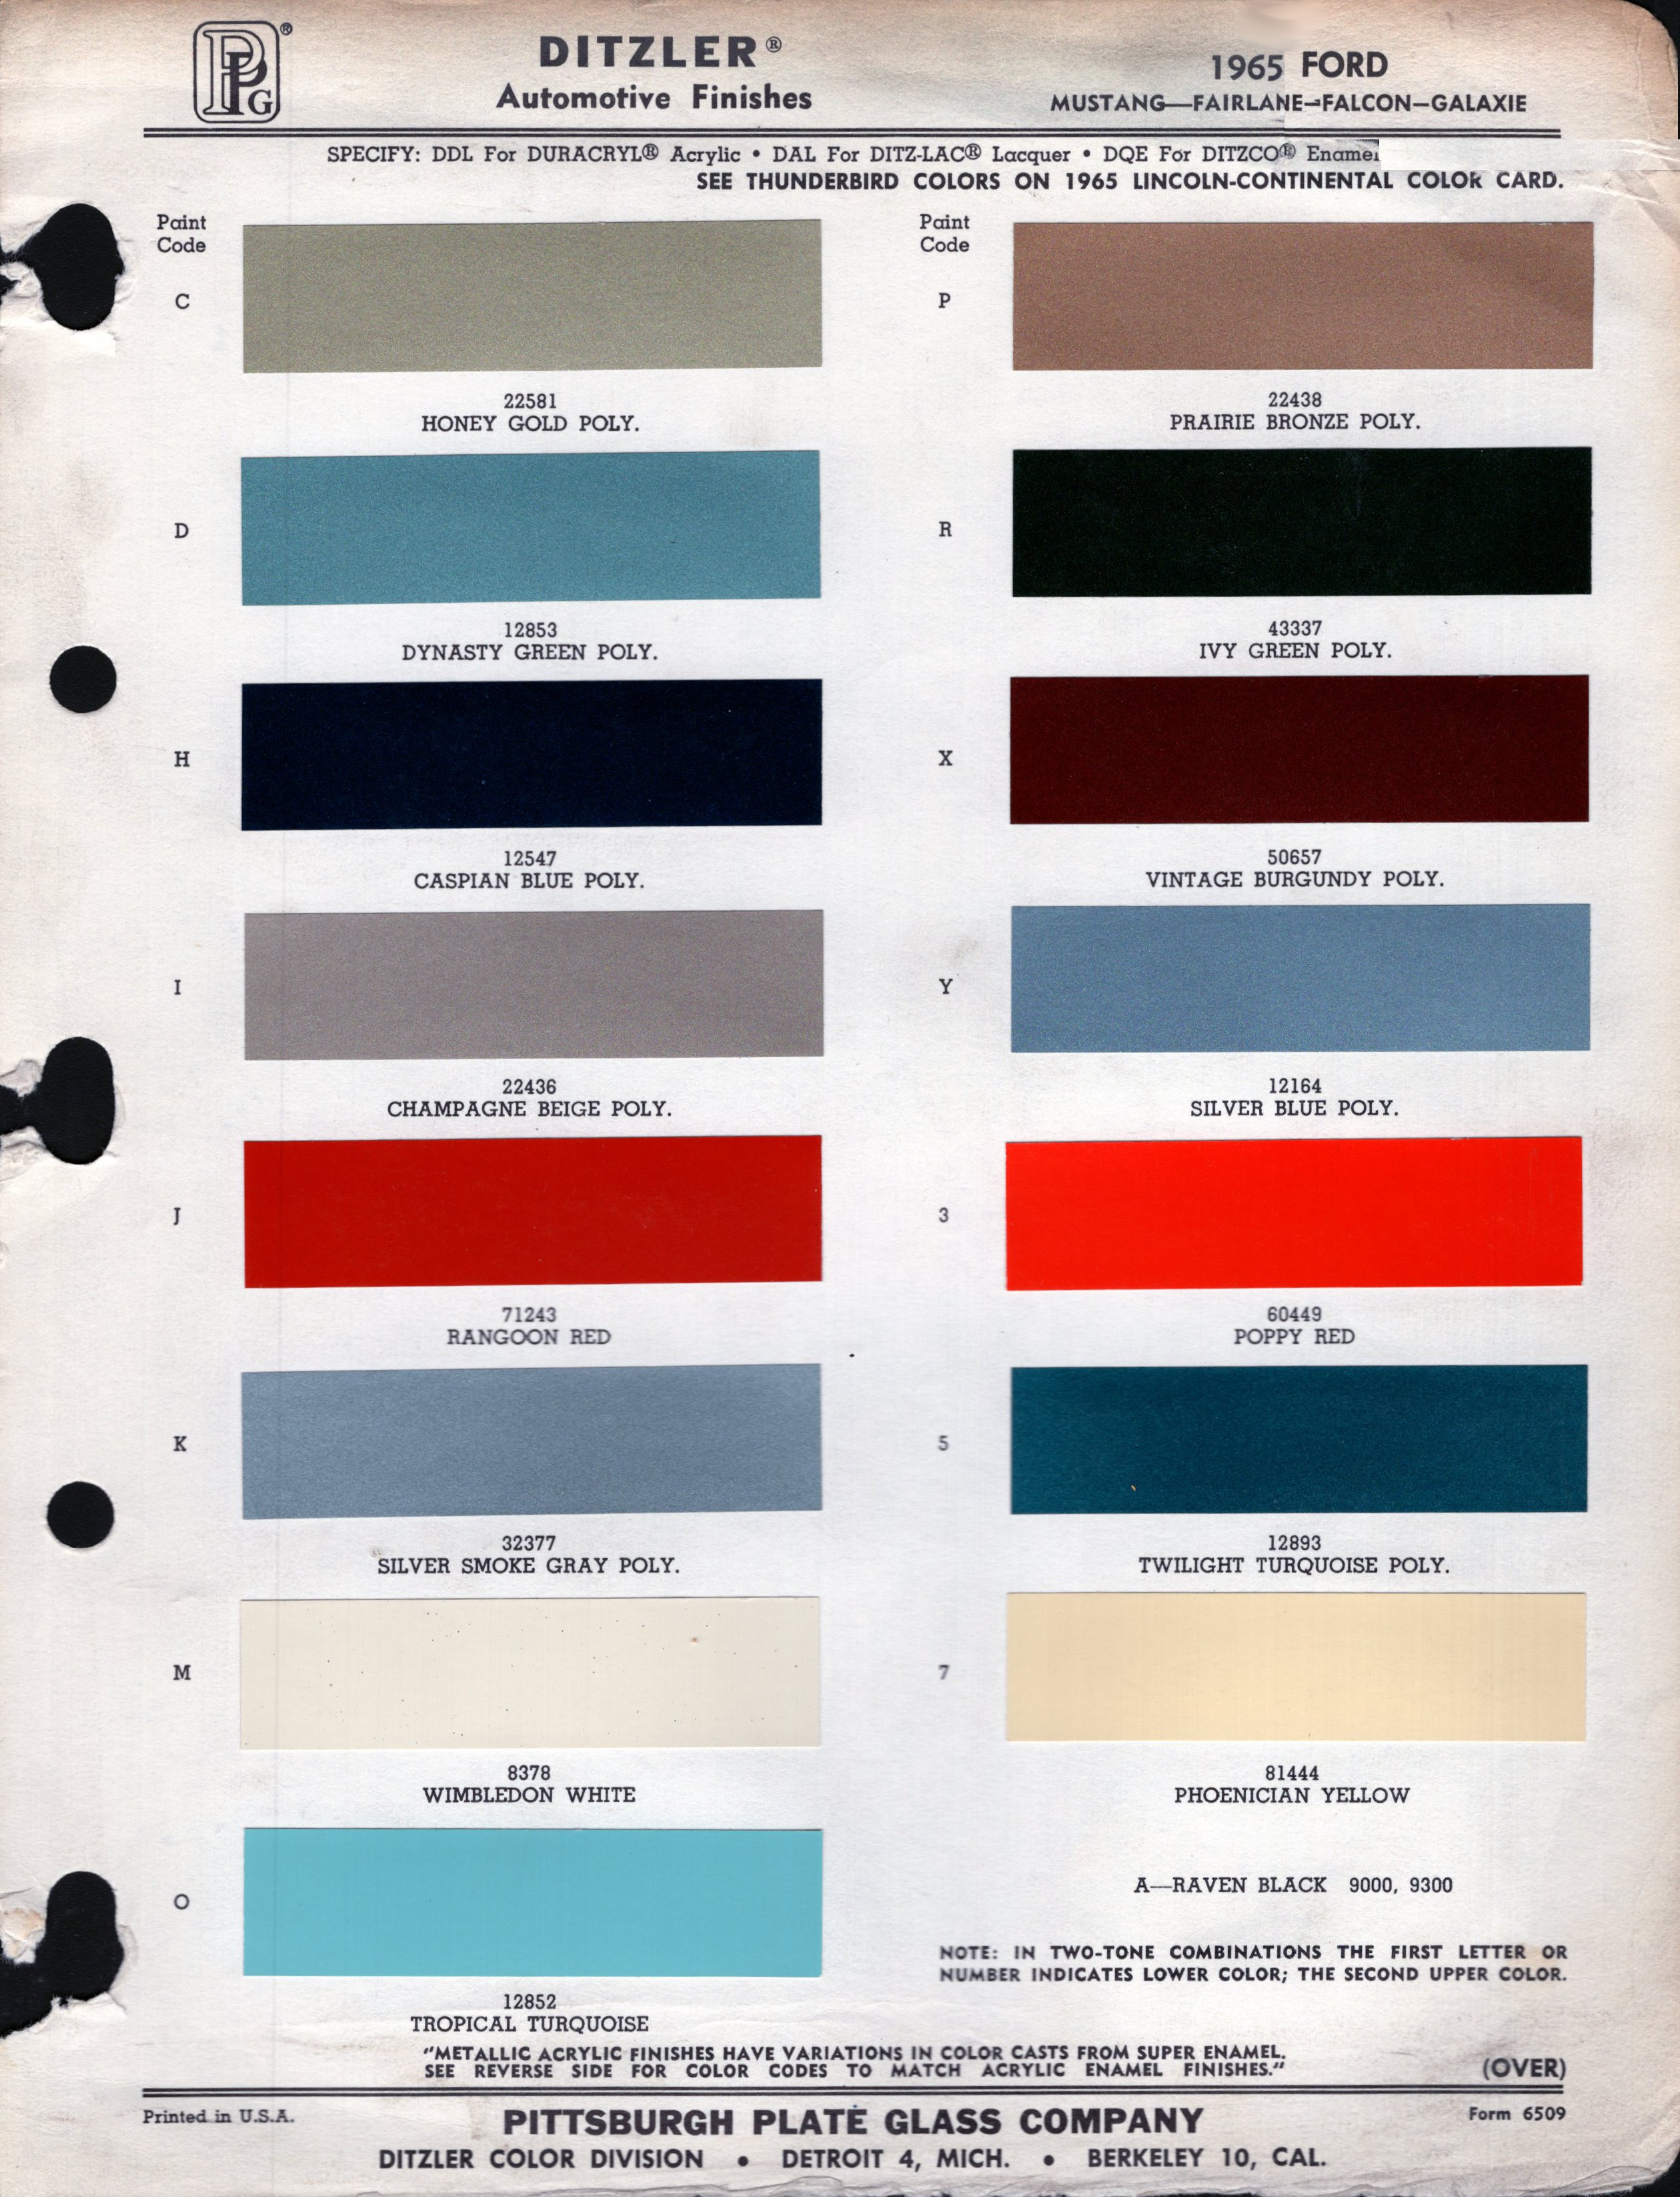 1965 Ford mustang color chart